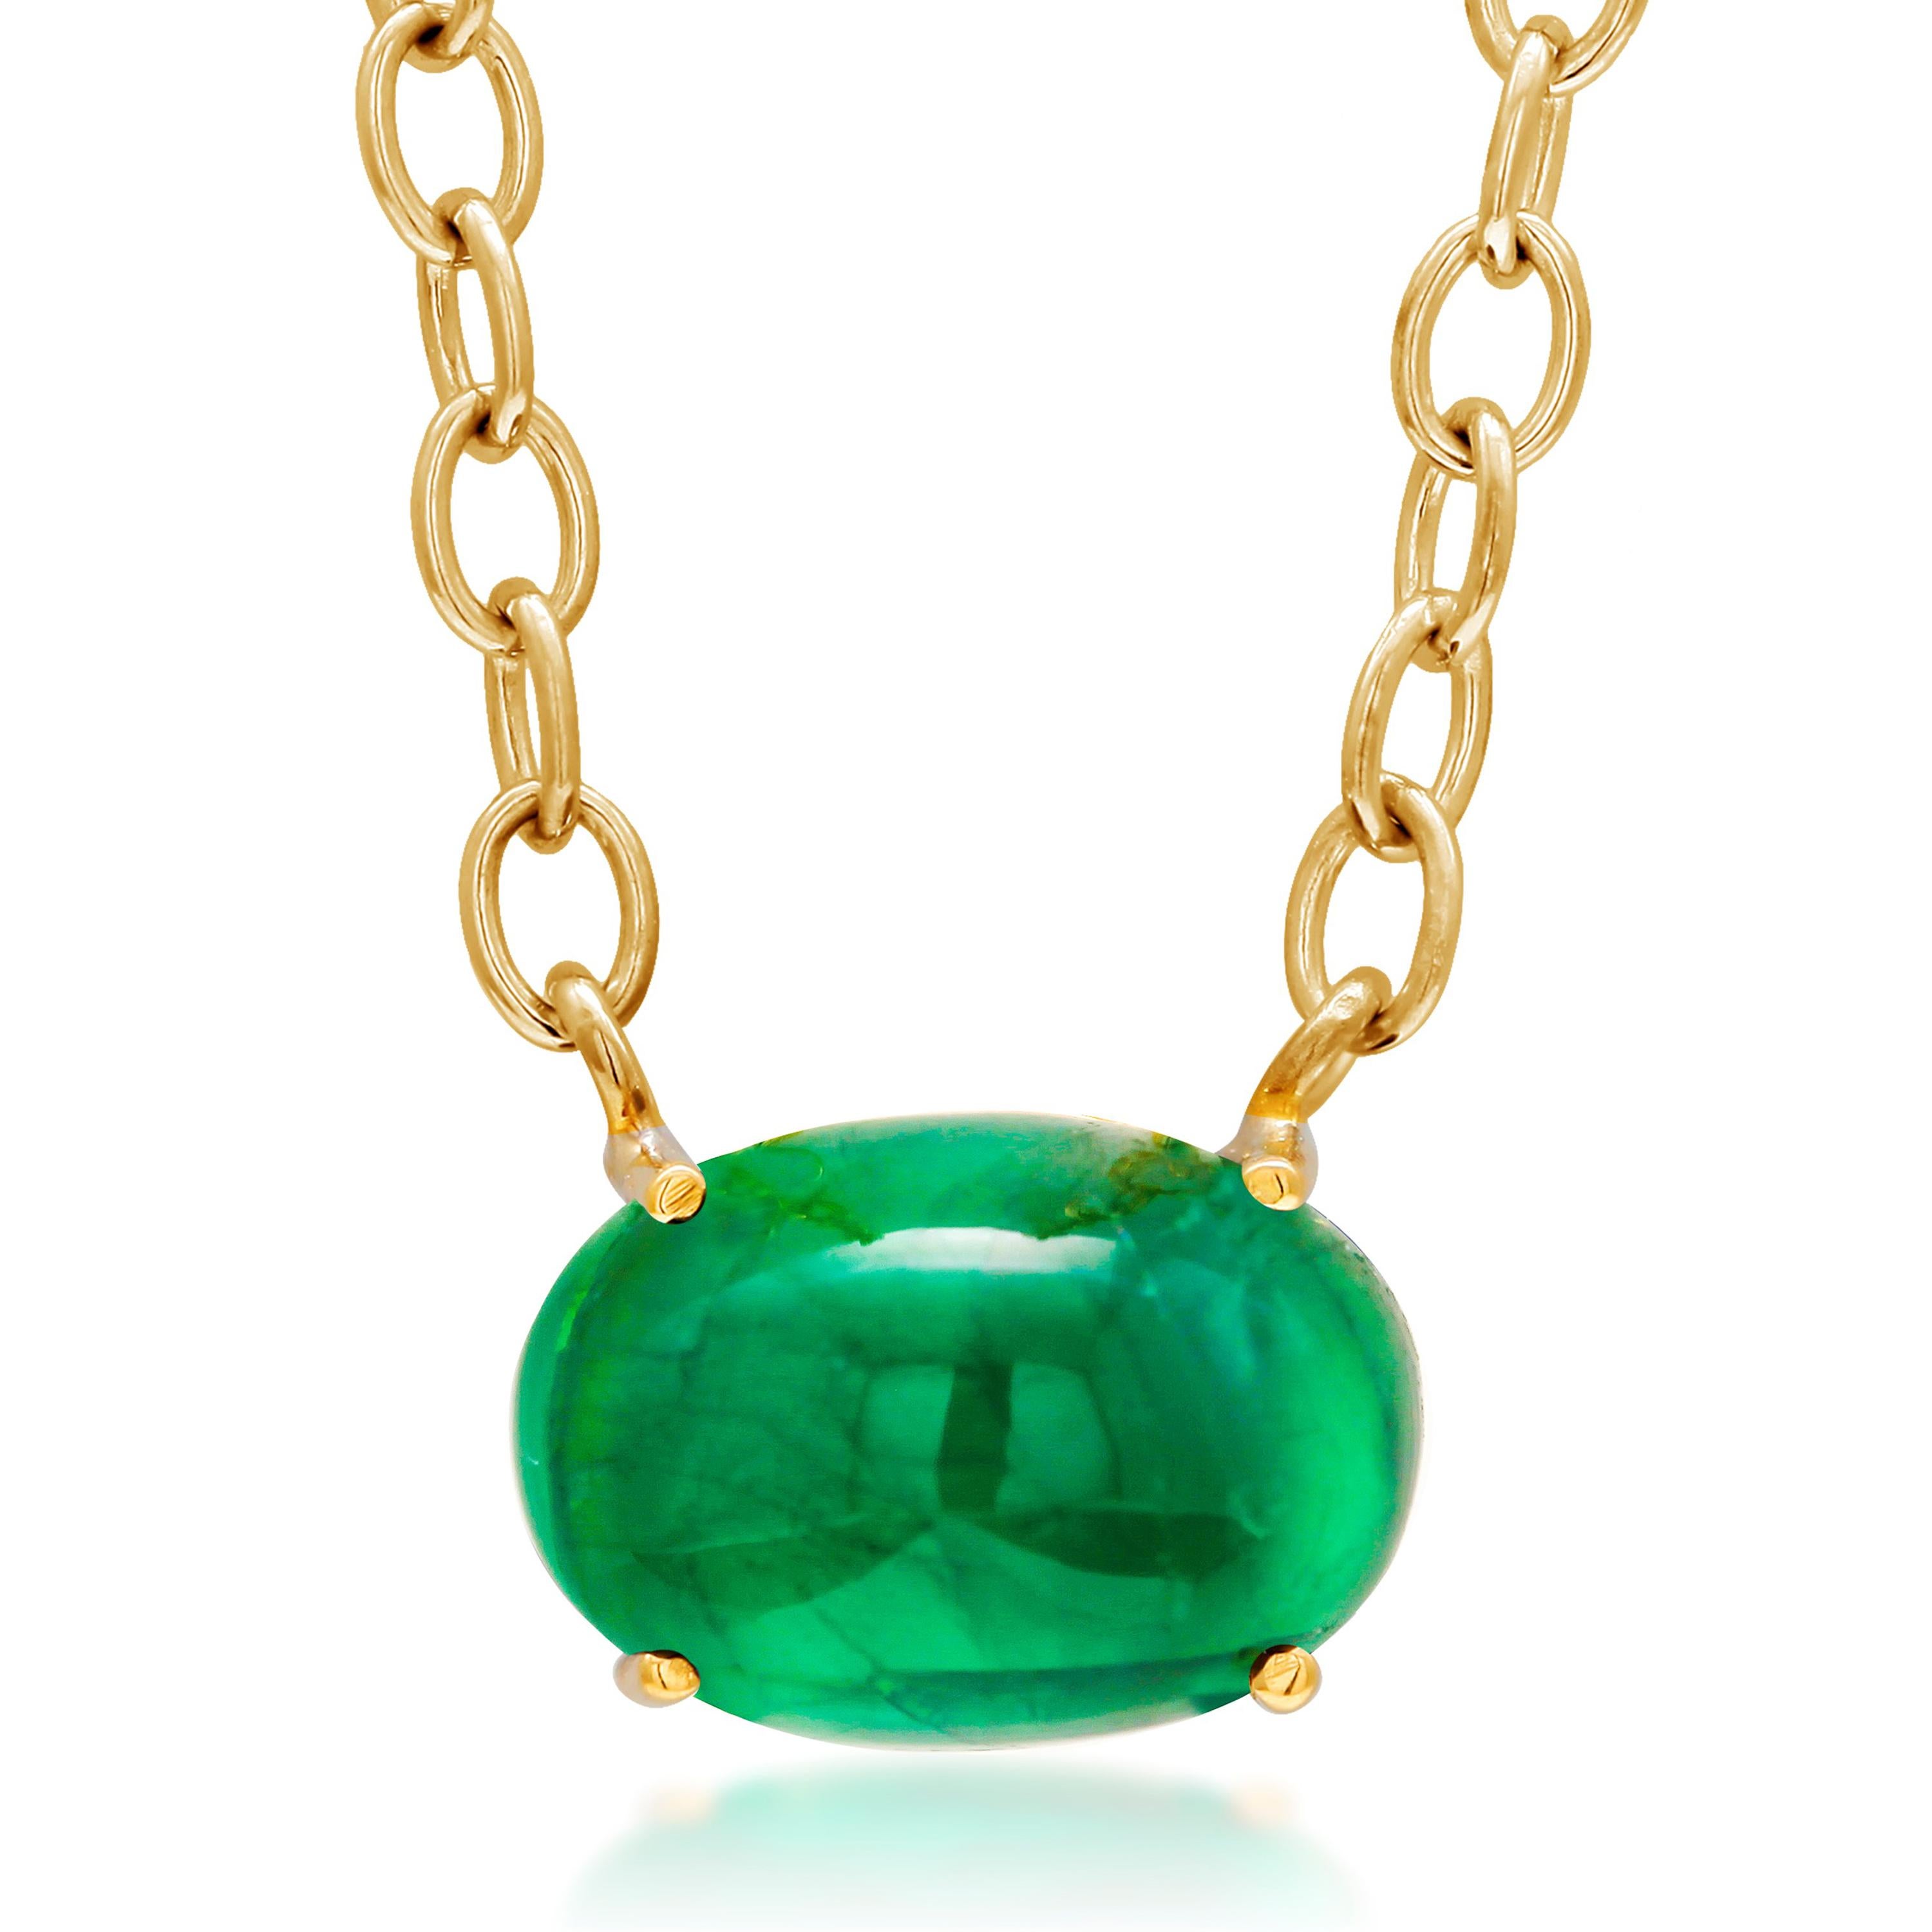 Sugarloaf Cabochon Colombia Cabochon Emerald Weighing 6.53 Carat Yellow Gold Pendant Necklace